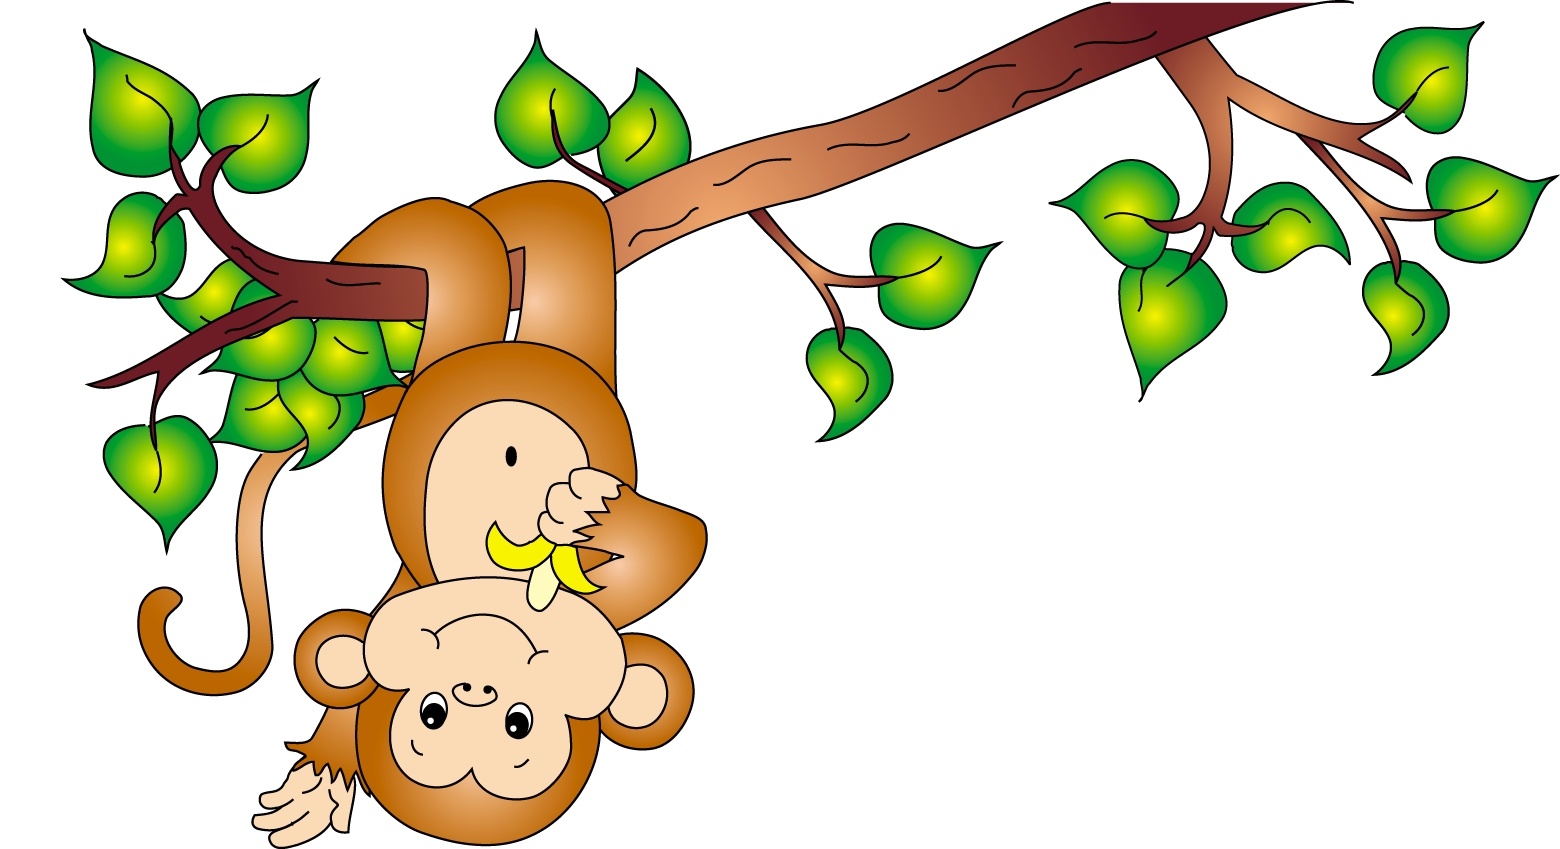 Cute Monkey Cartoon Pictures - Cliparts.co